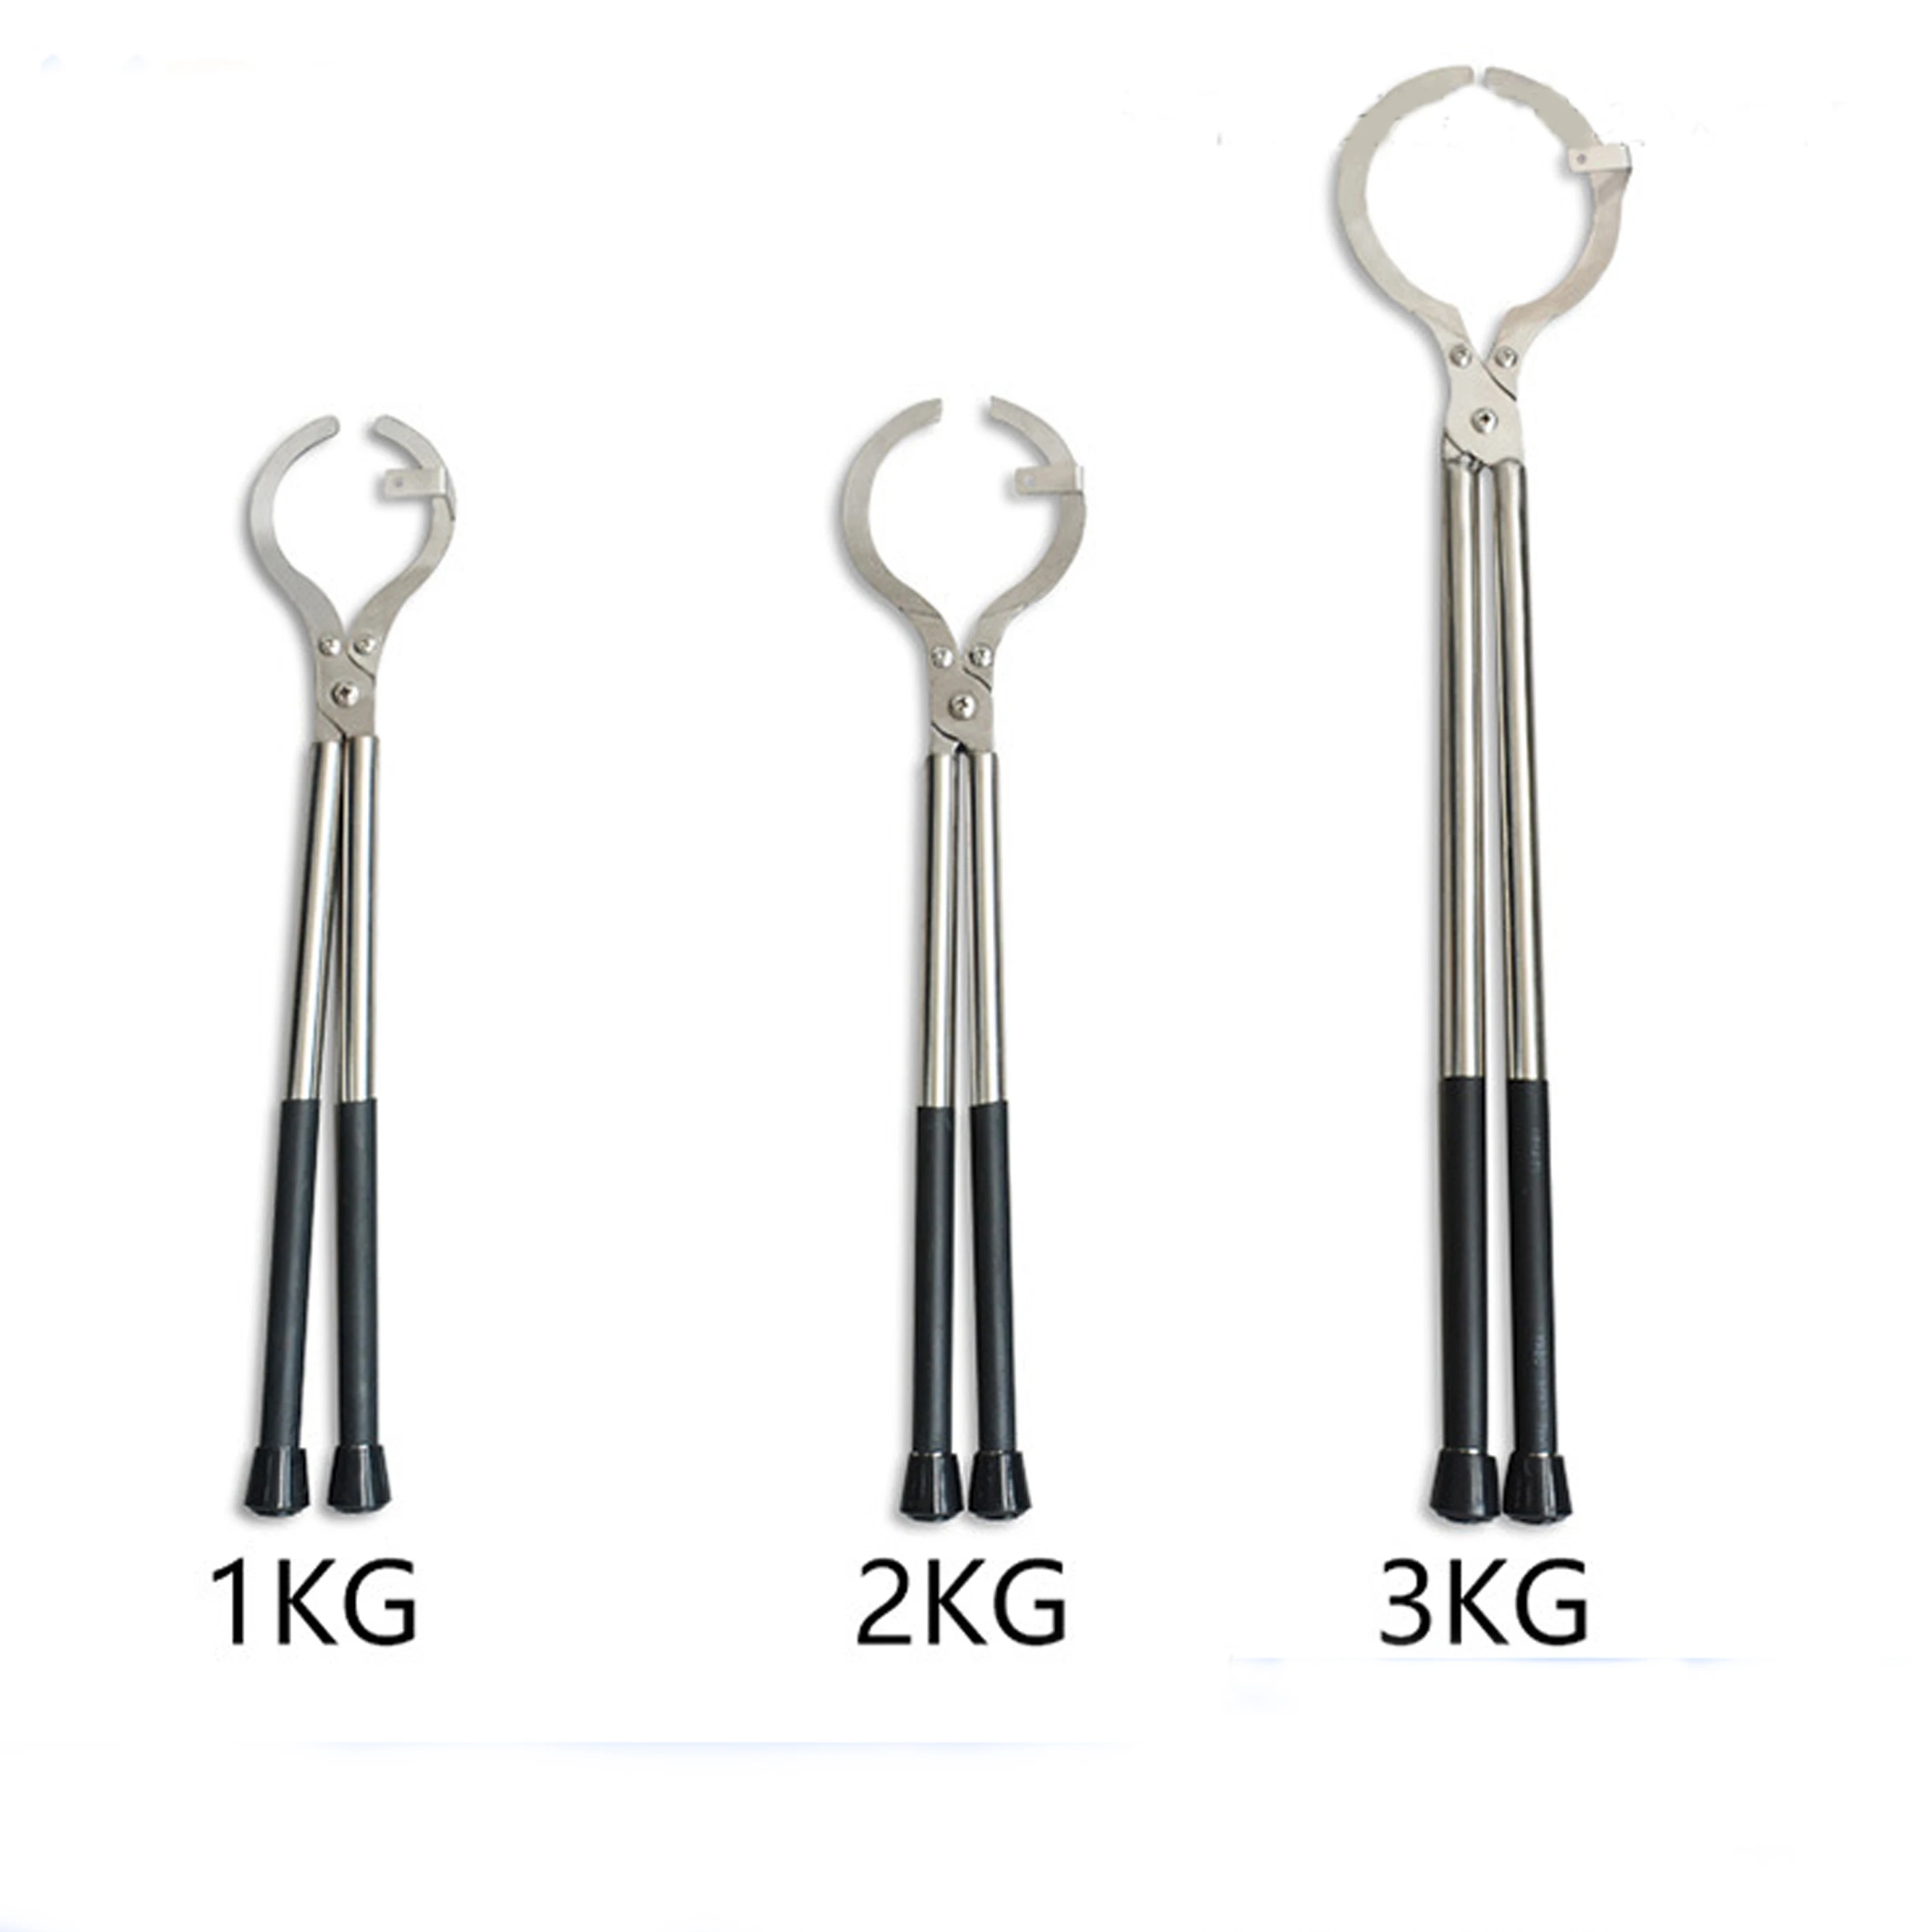 Stainless Steel Crucible Tongs 2kg Graphite Melting  Holder  Gold Melting Furnace Attachment   Jewelry Tools crucible tongs for clay graphite crucibles clamp pliers for casting metal jewelry gold silver melting furnace tweezer refining